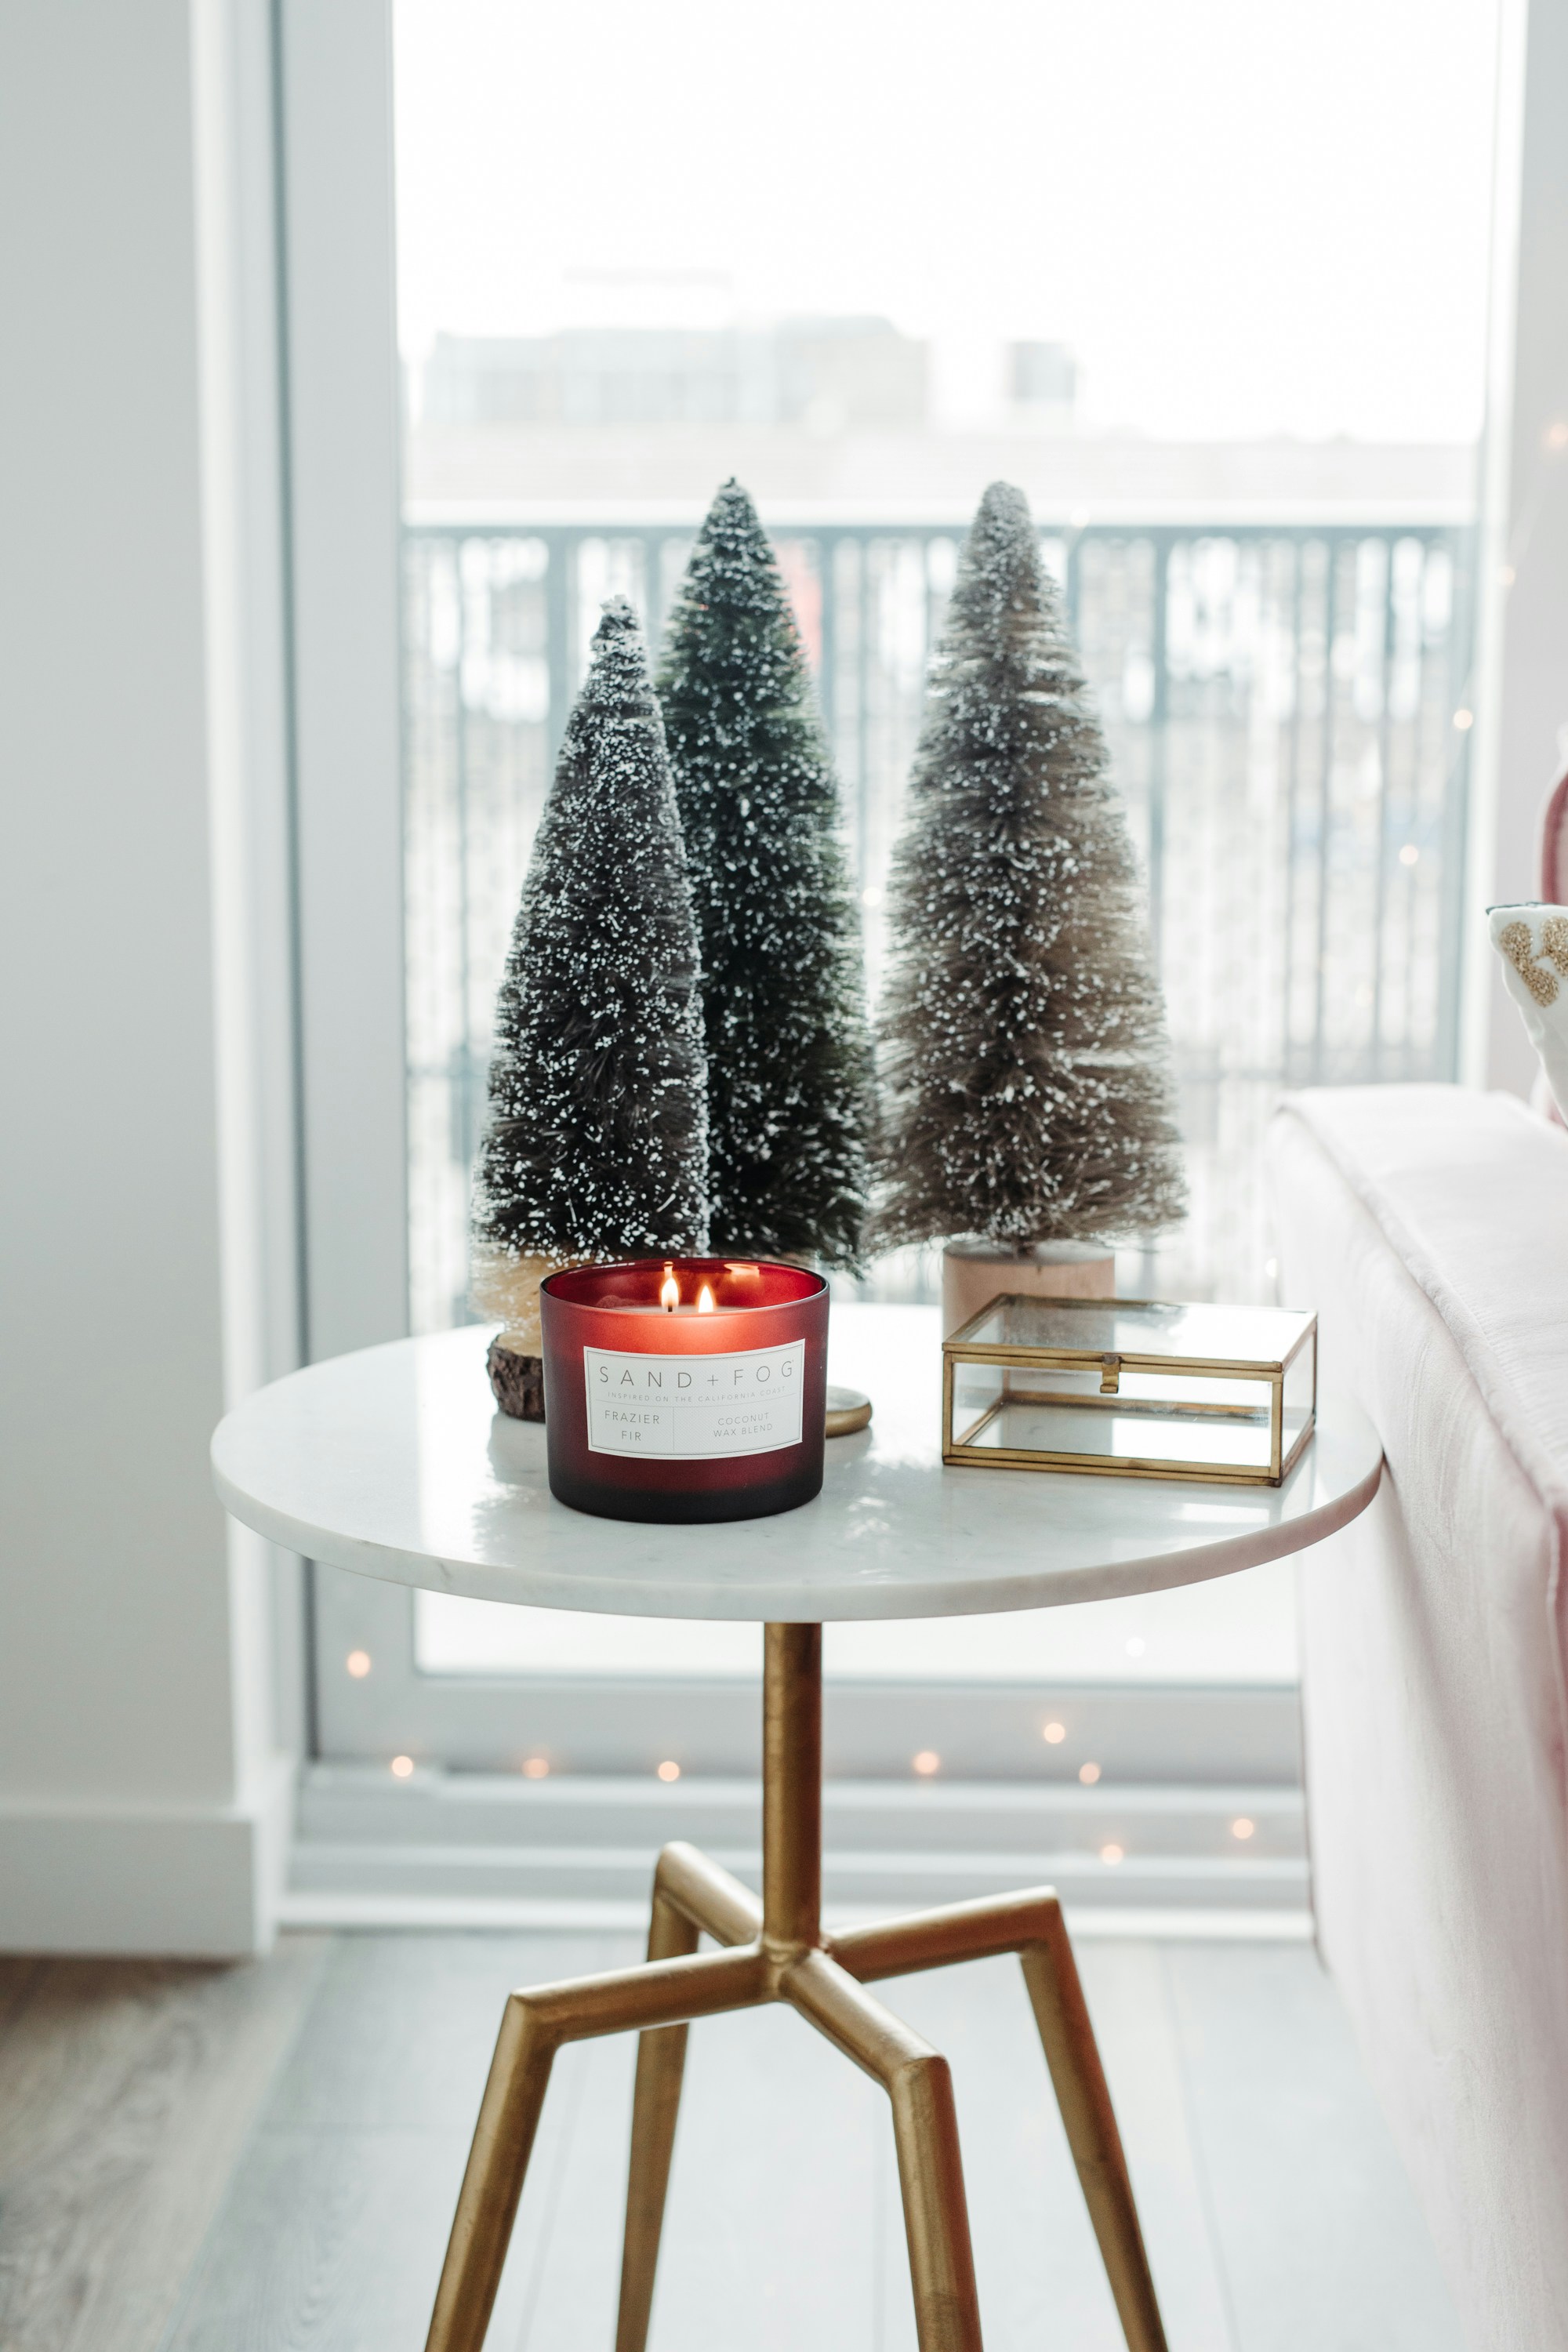 Bottlebrush trees and a Sand + Fog candle are a classic Christmas mainstay!